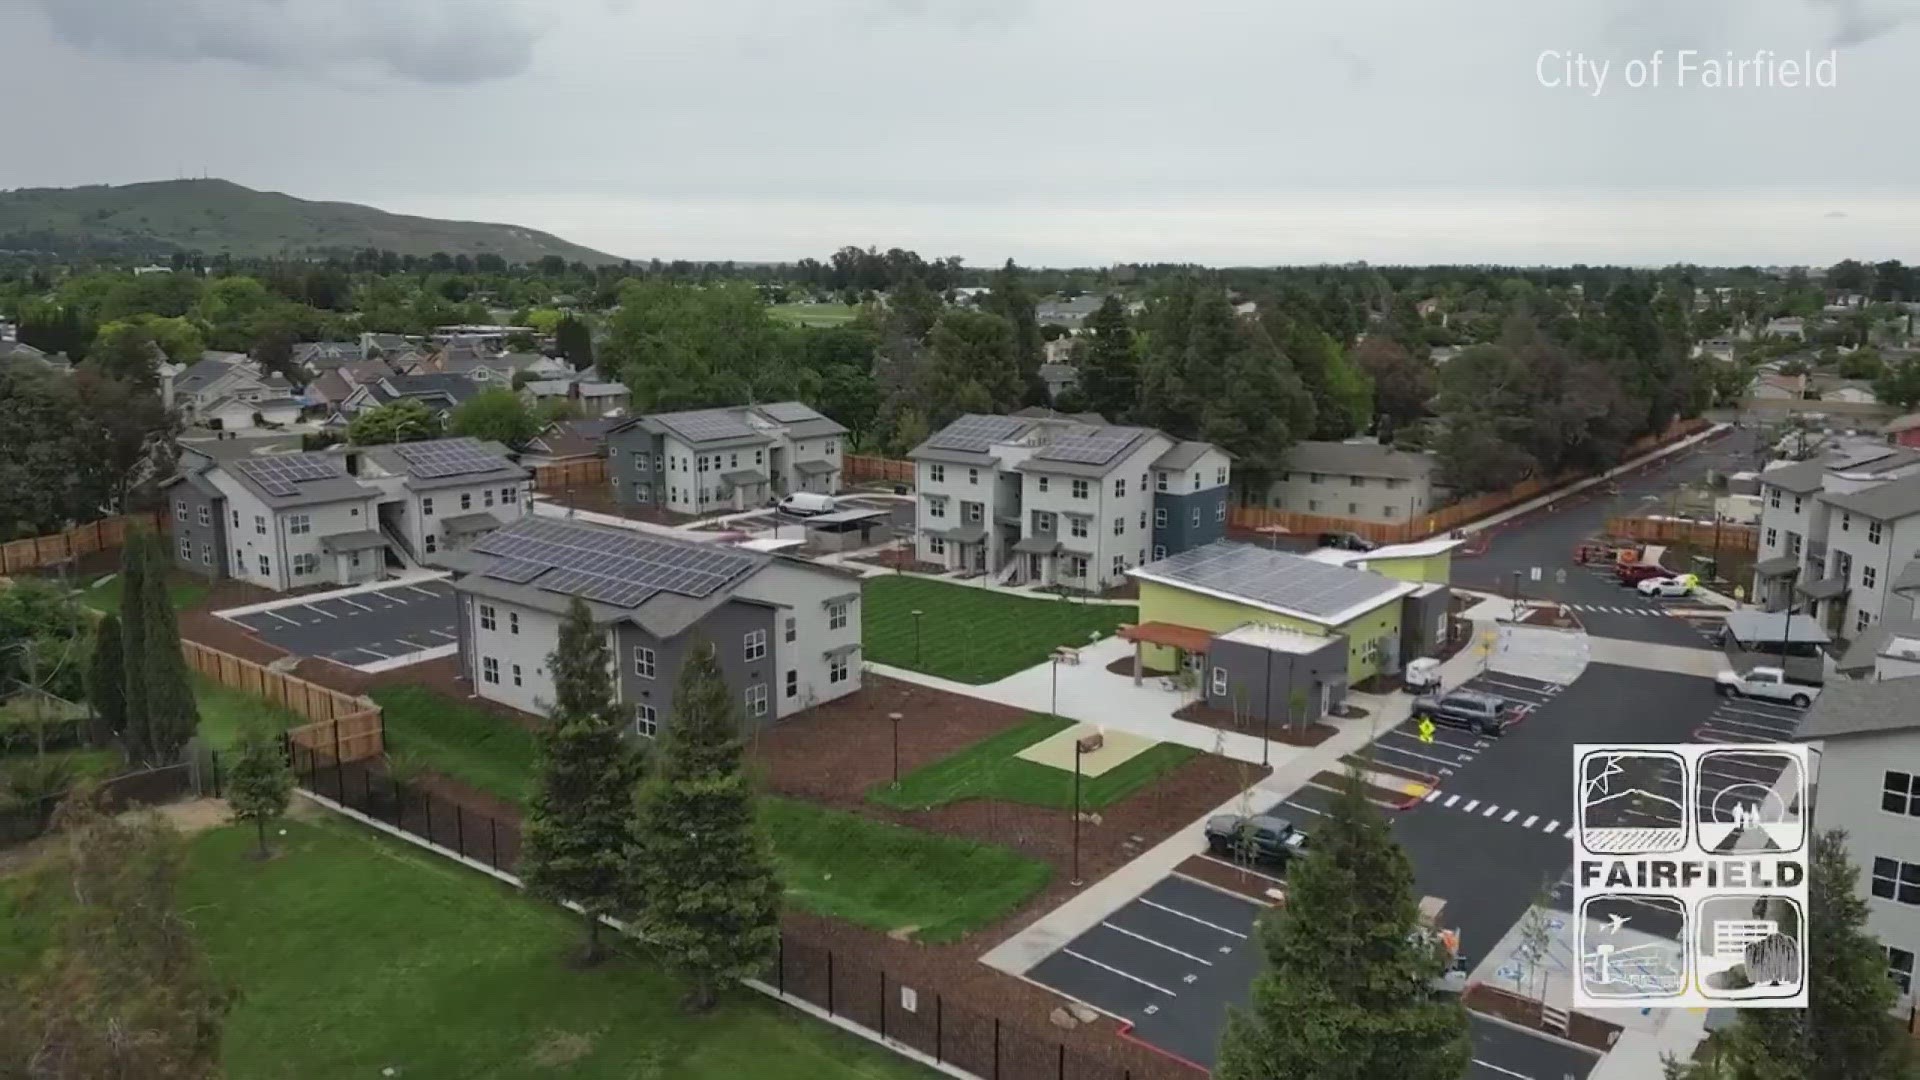 A new housing development for very low to low-income households in Fairfield has finished construction and is ready for residents to move in.